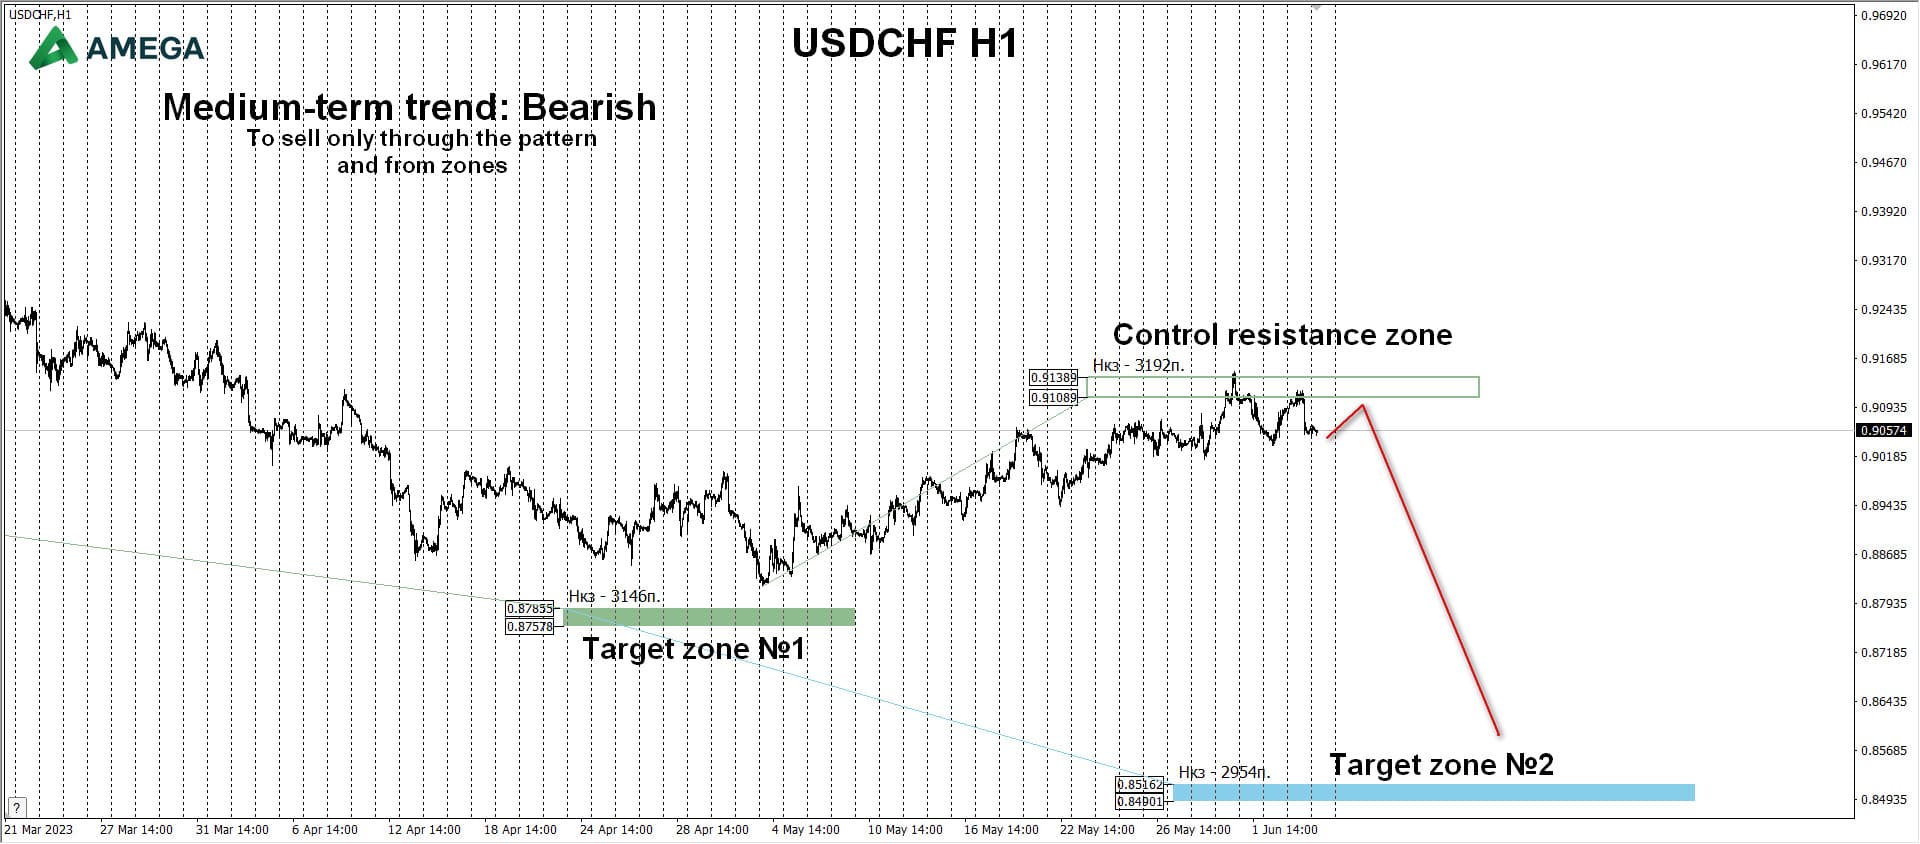 USDCHF: The bear market is continuing